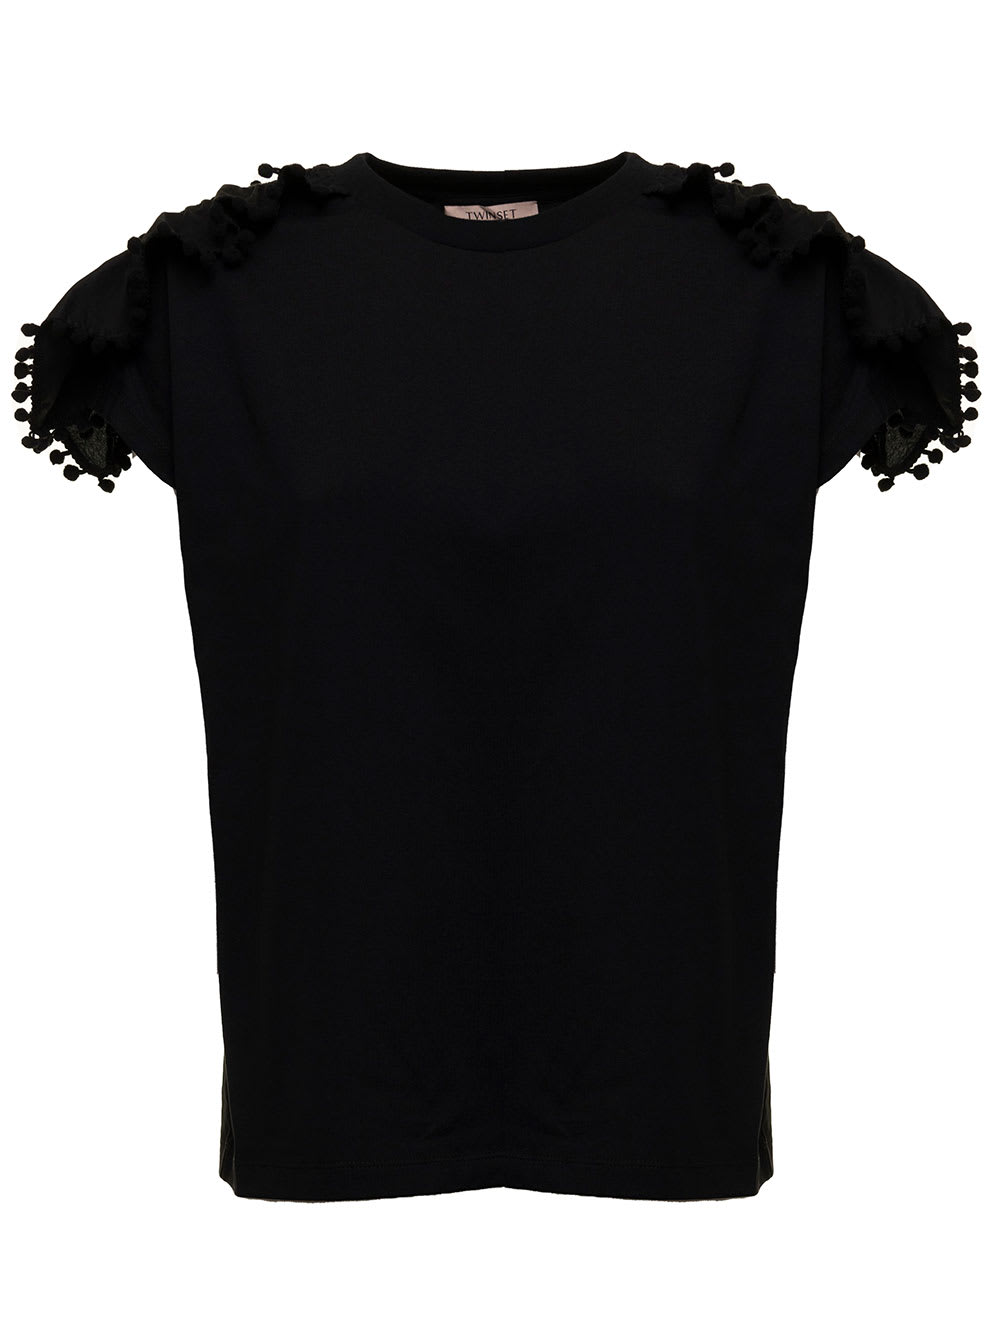 TwinSet Twin Set Womans Black Cotton T-shirt With Cap Sleeves And Tassels